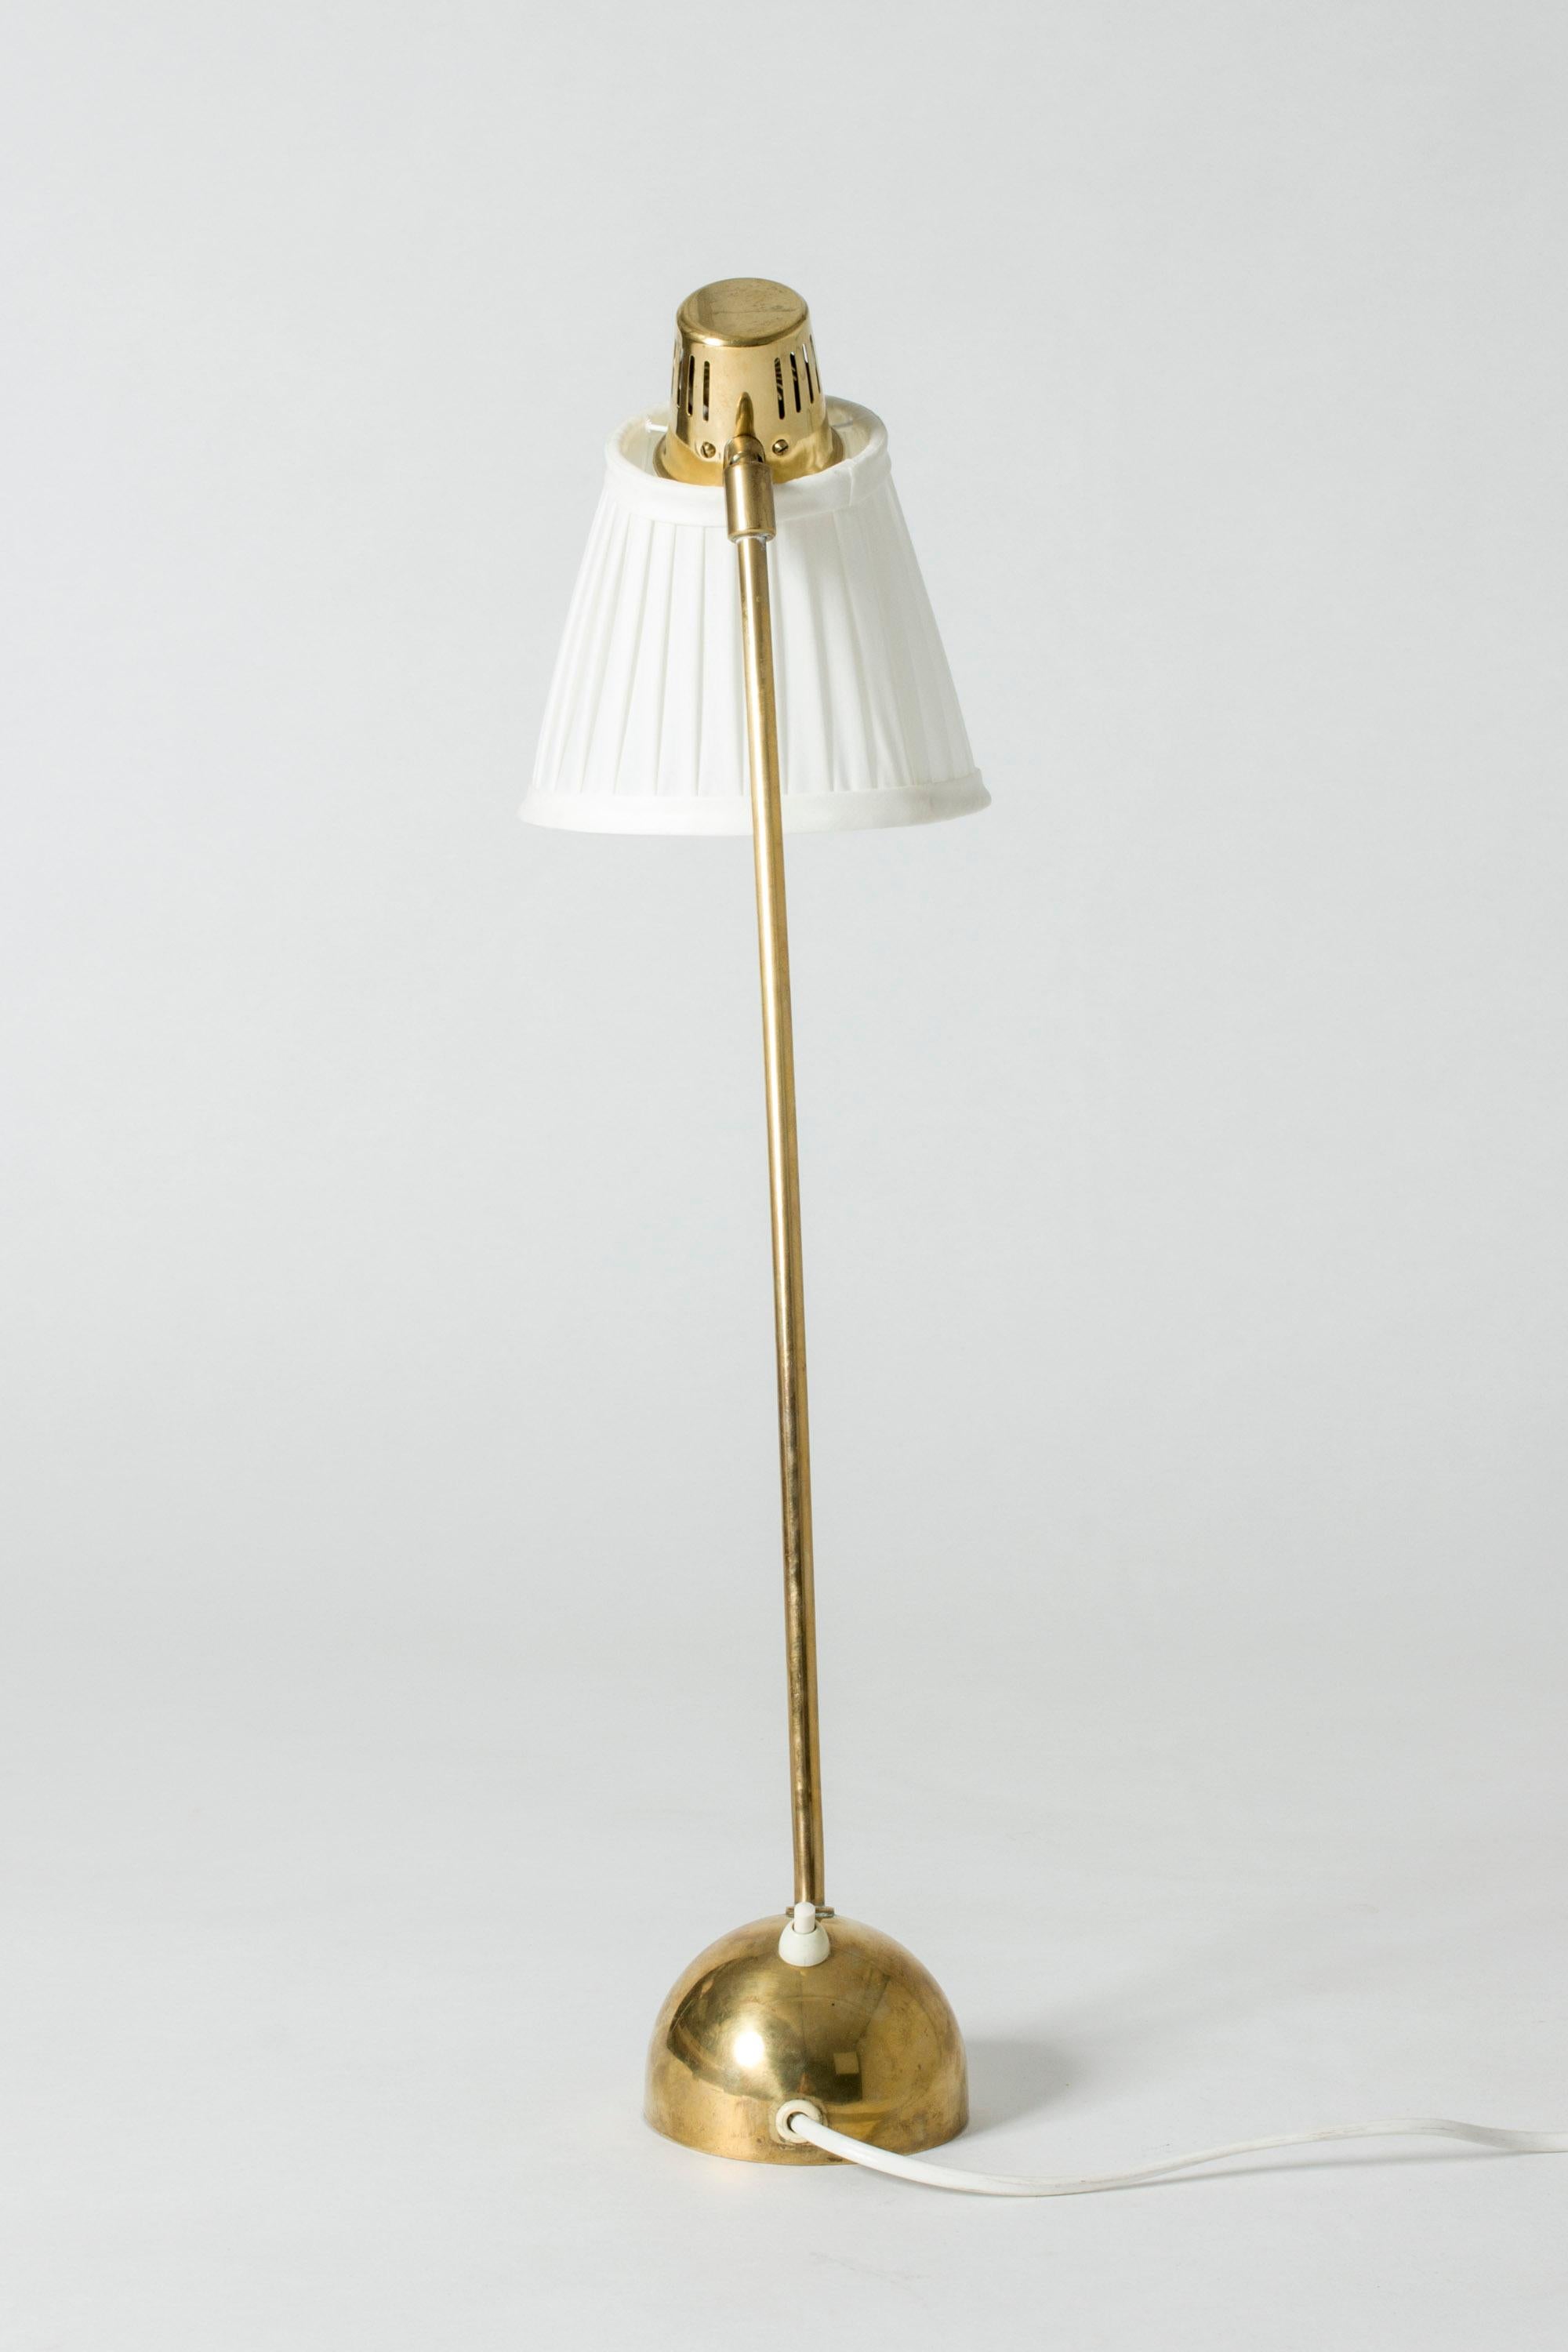 Elegant brass table or desk lamp by Hans Bergström with an elongated shaft and adjustable shade. Rounded base, nice silhouette.